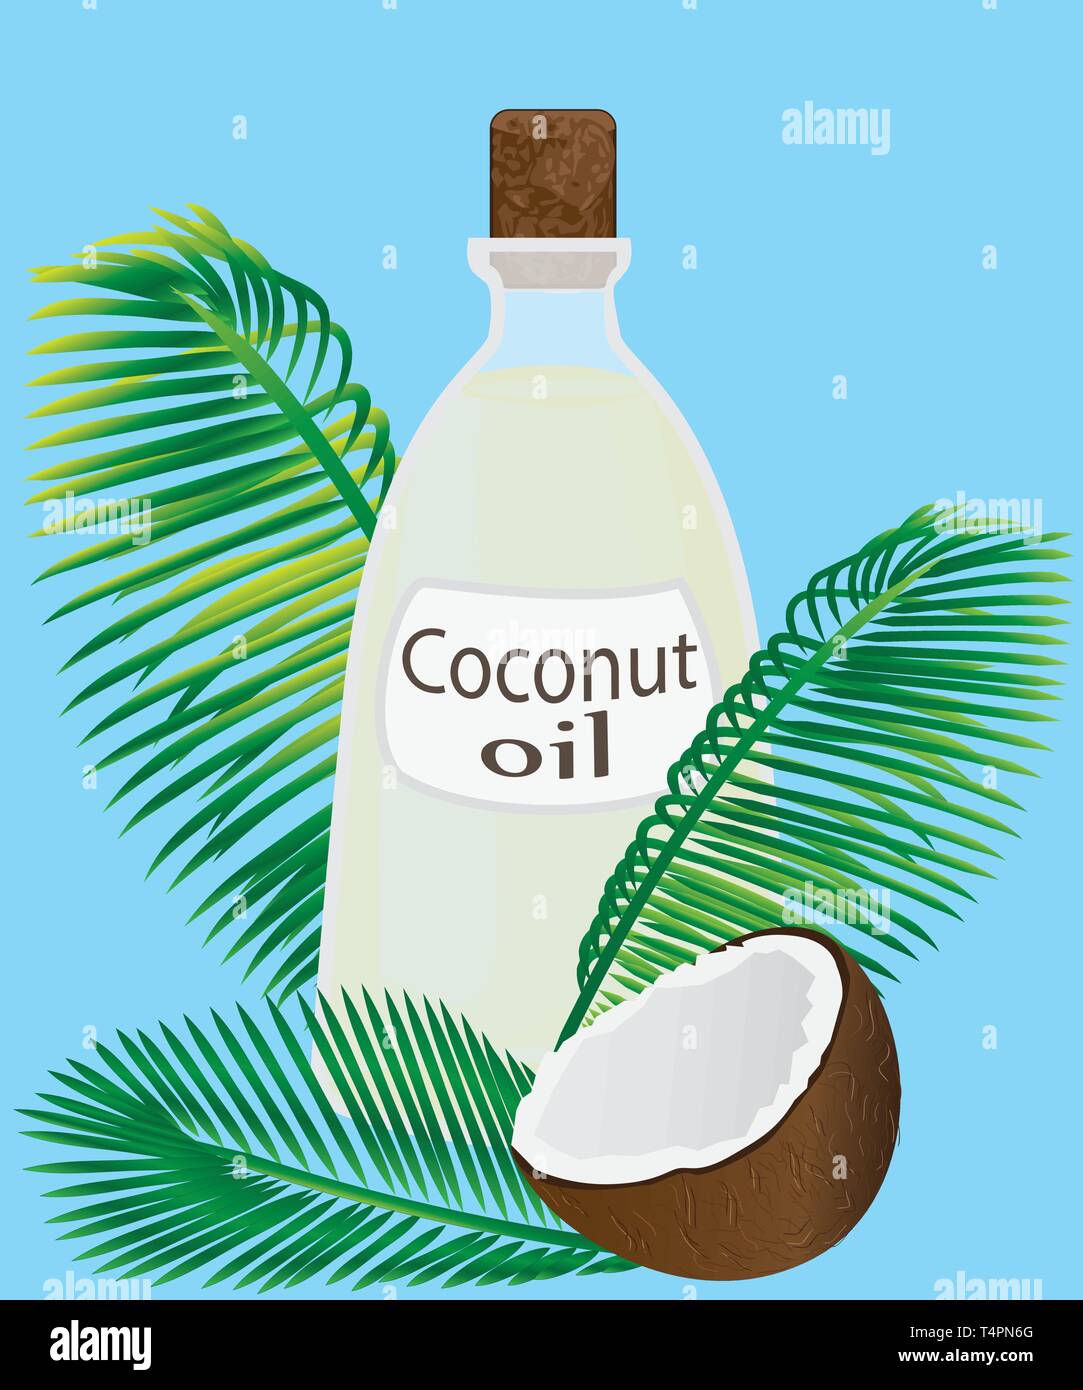 Coconut oil in a jar coconuts and palm leaves as decoration vector illustration Stock Vector